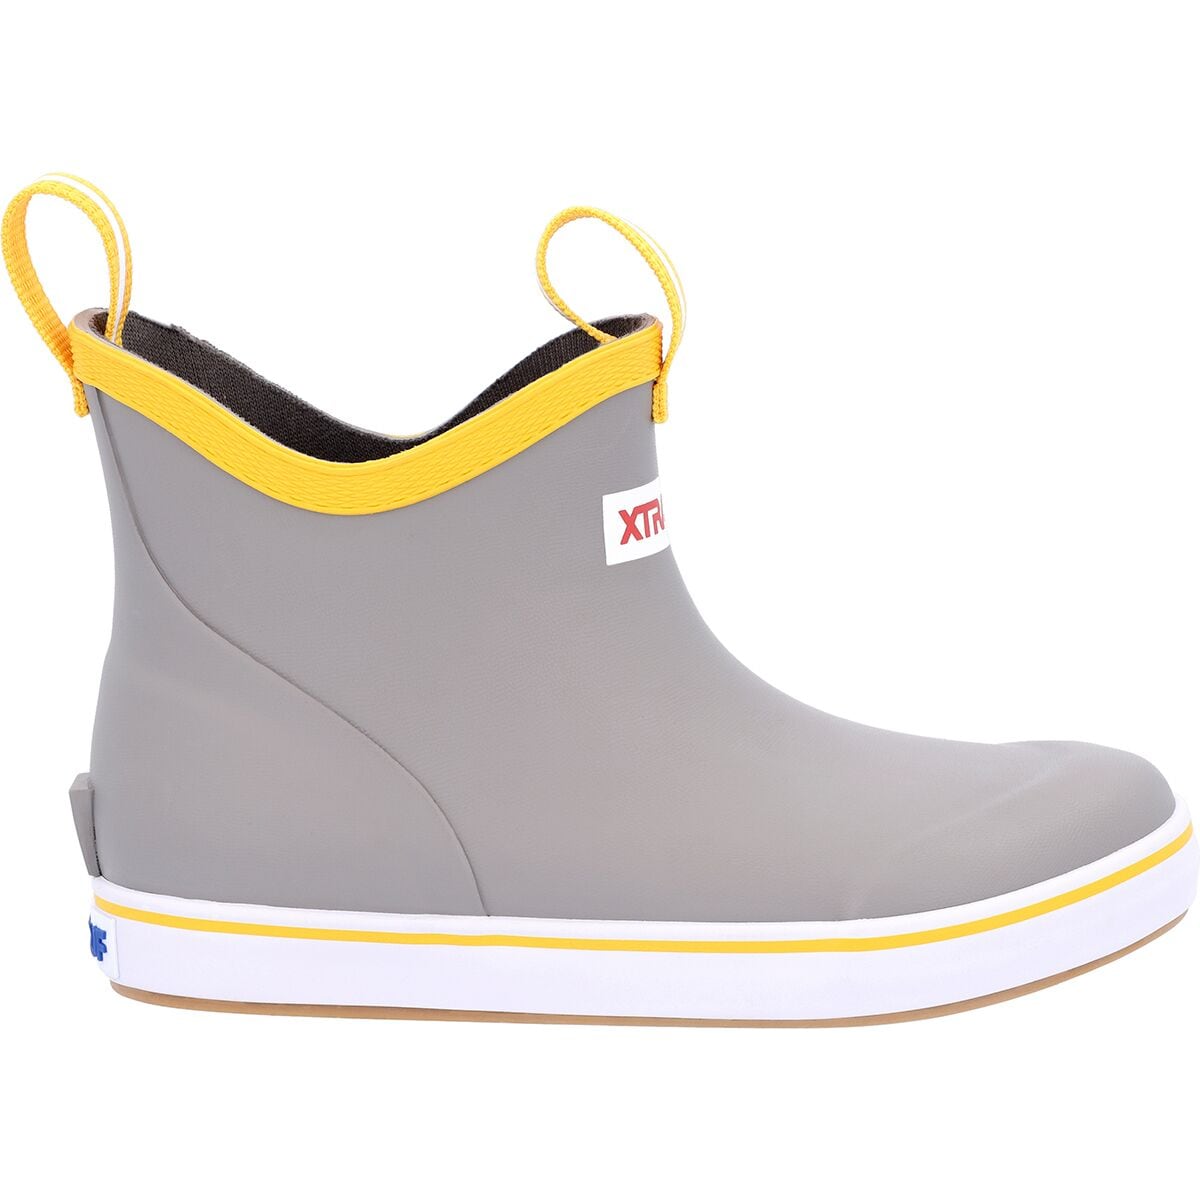 Xtratuf Ankle Deck Rainboot - Toddlers'